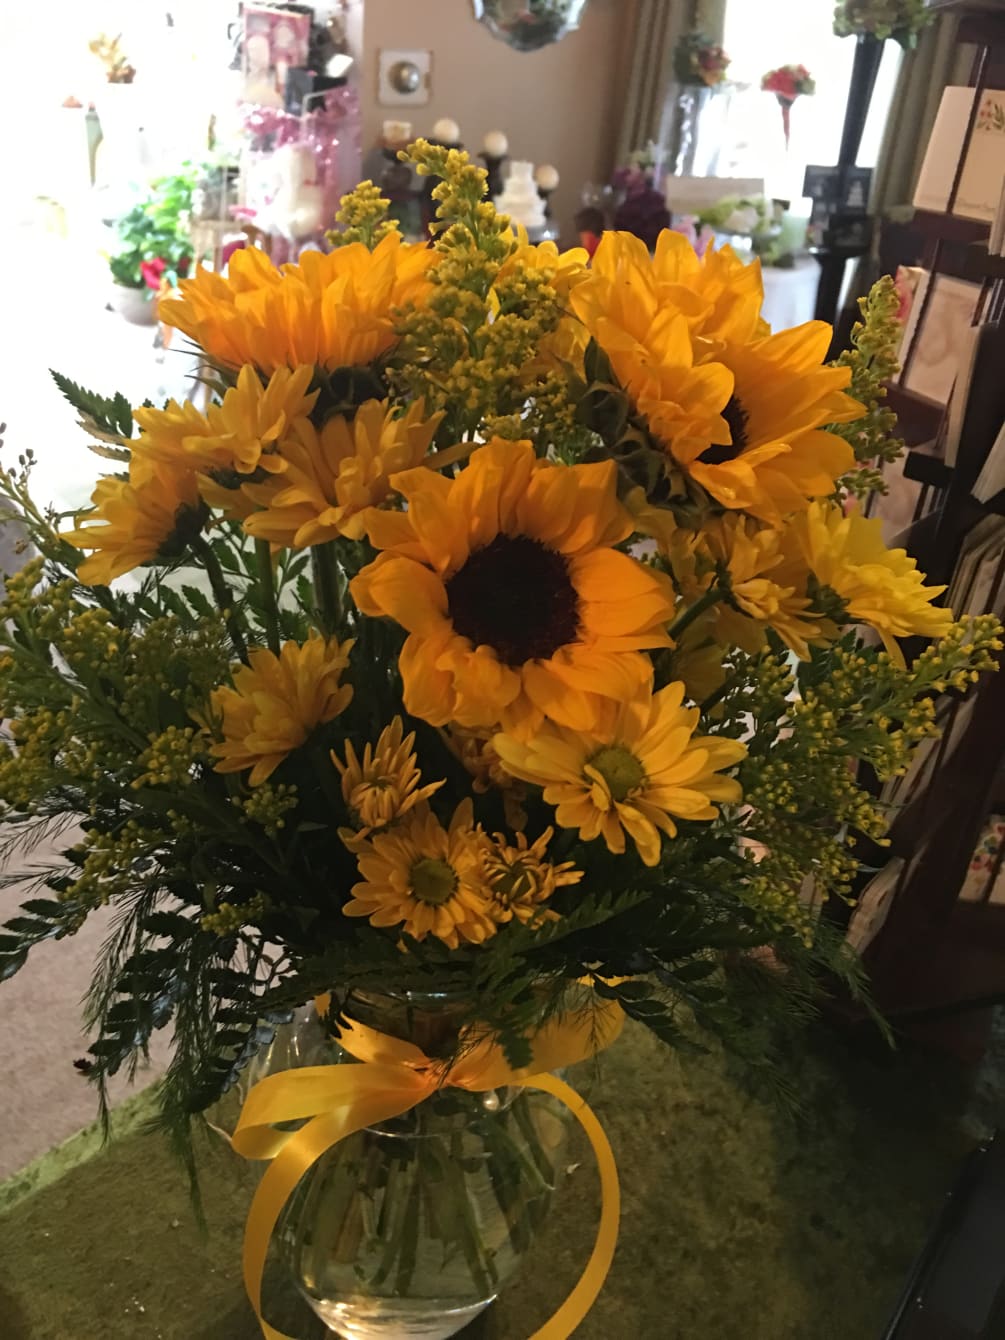 Sunflowers snd yellow Daiseys adorned with yellow holler in a clear vase.